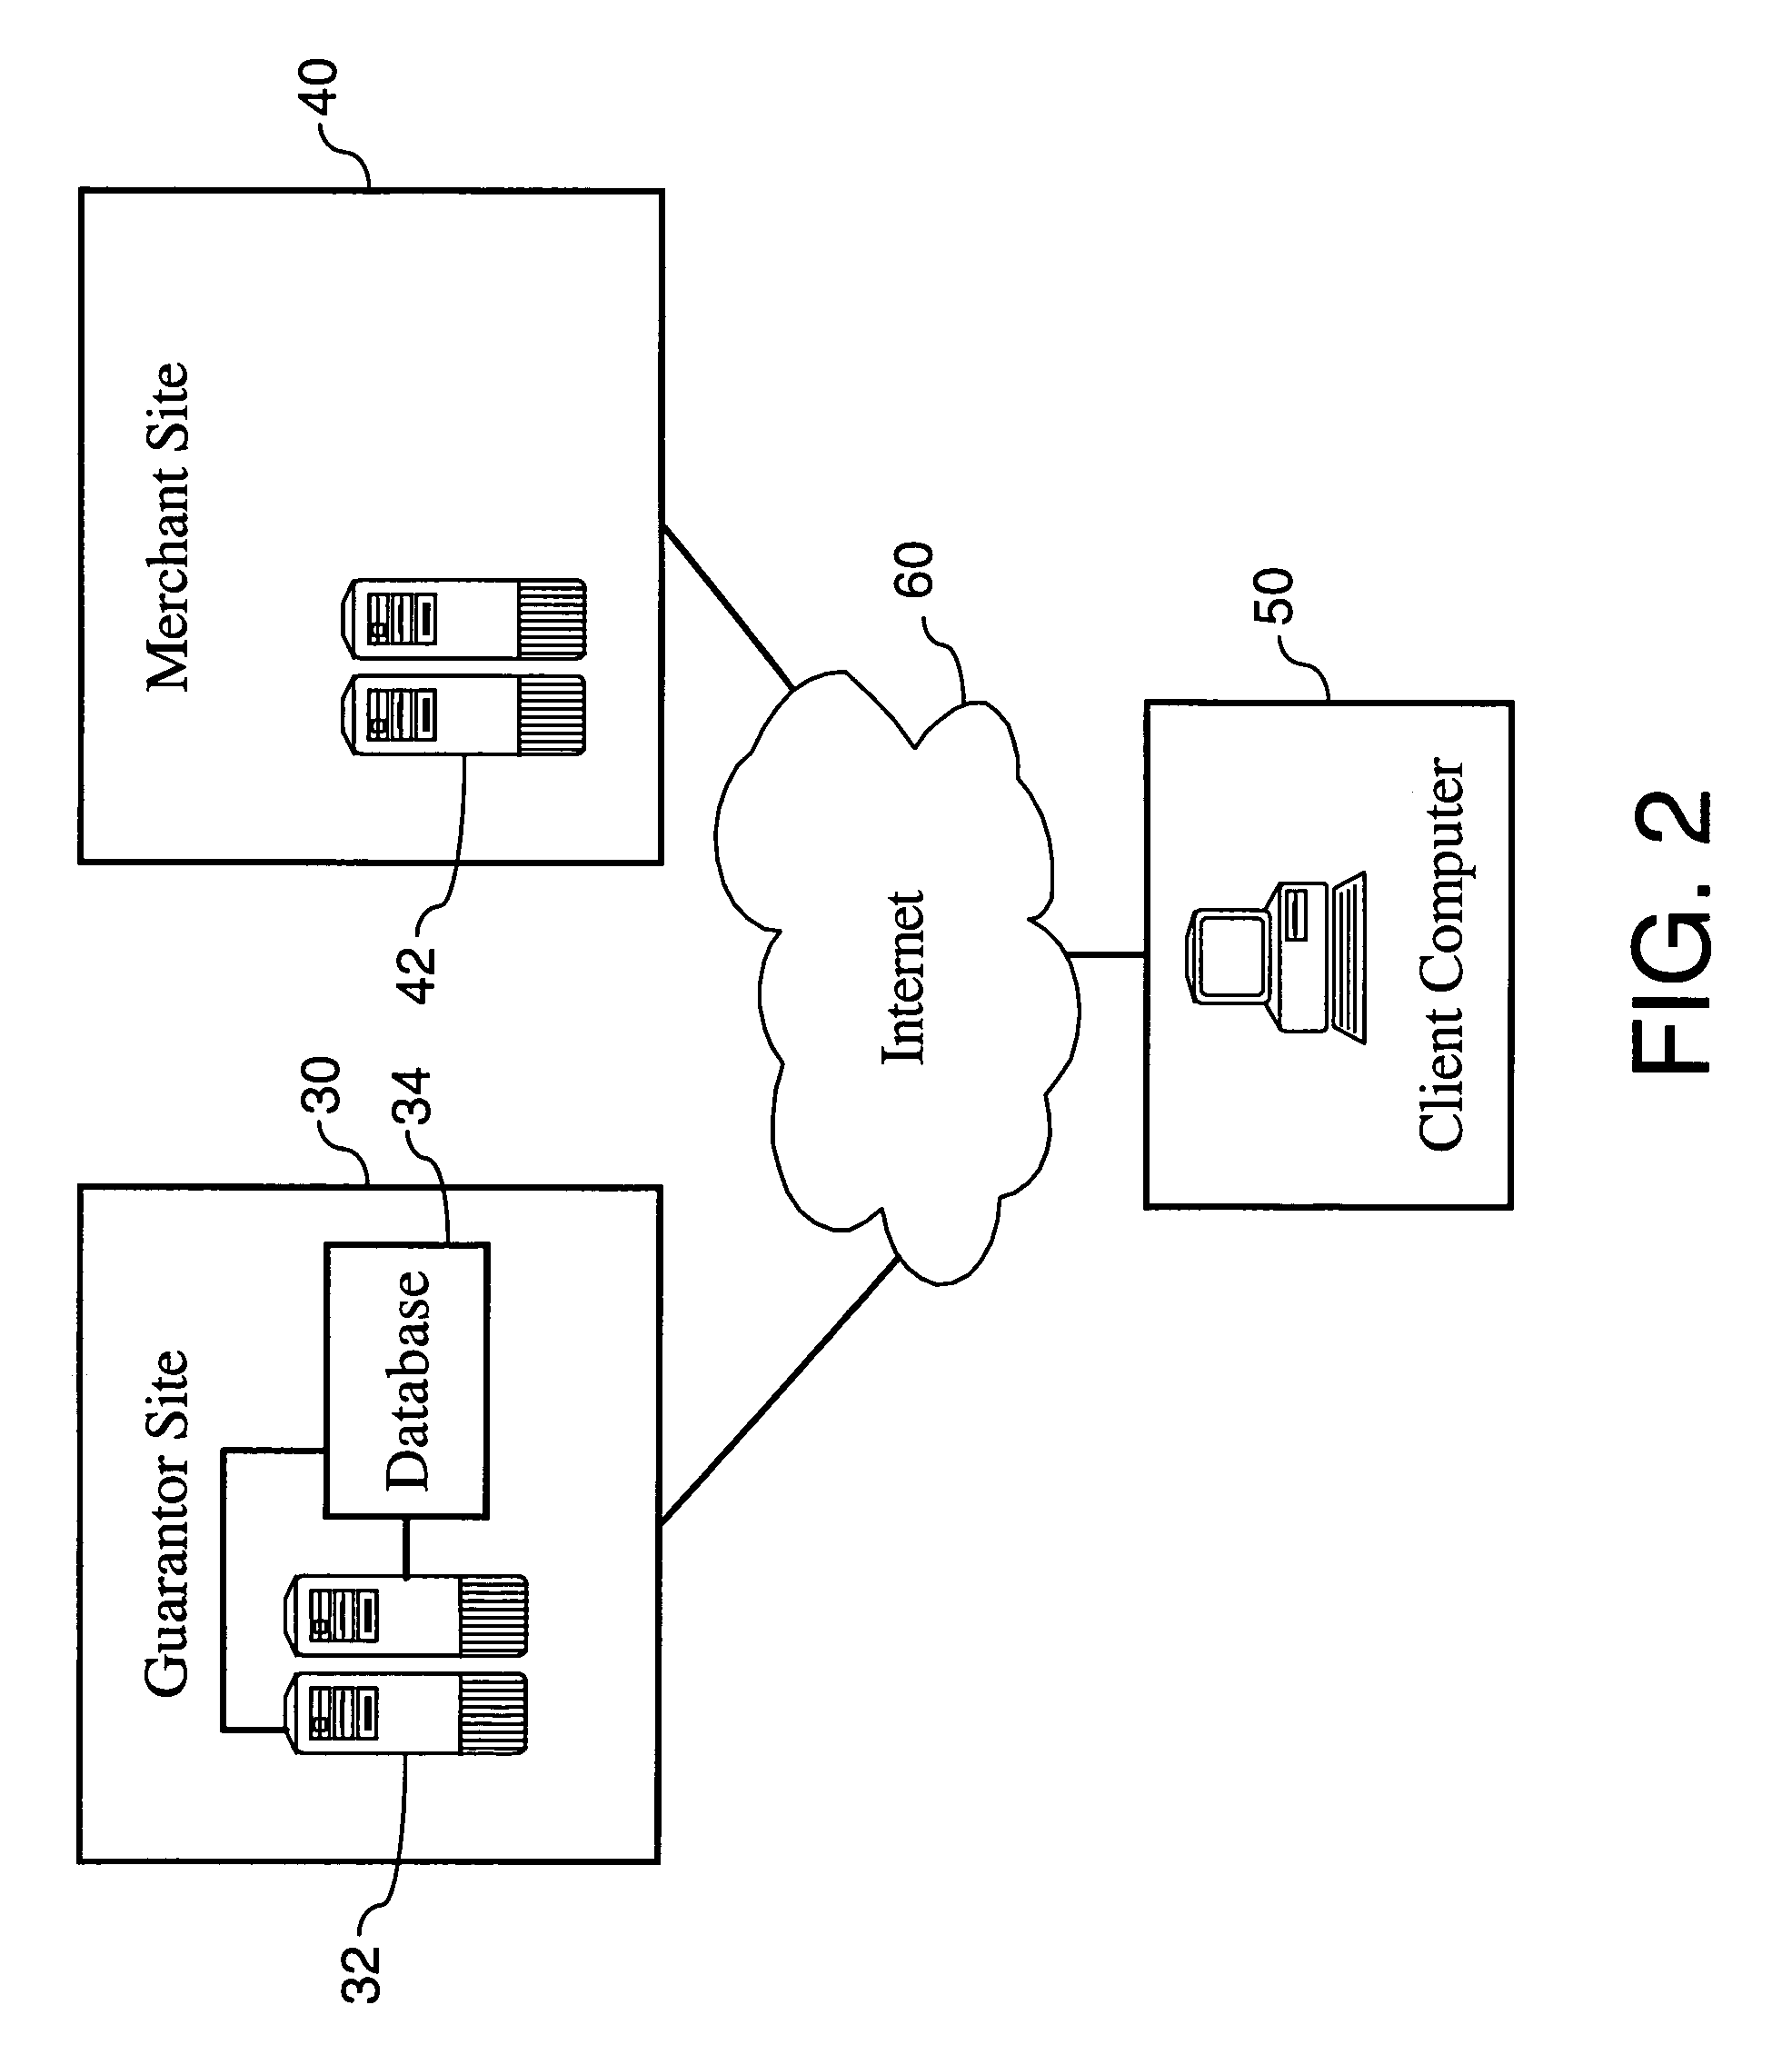 Method and system for secure guaranteed transactions over a computer network